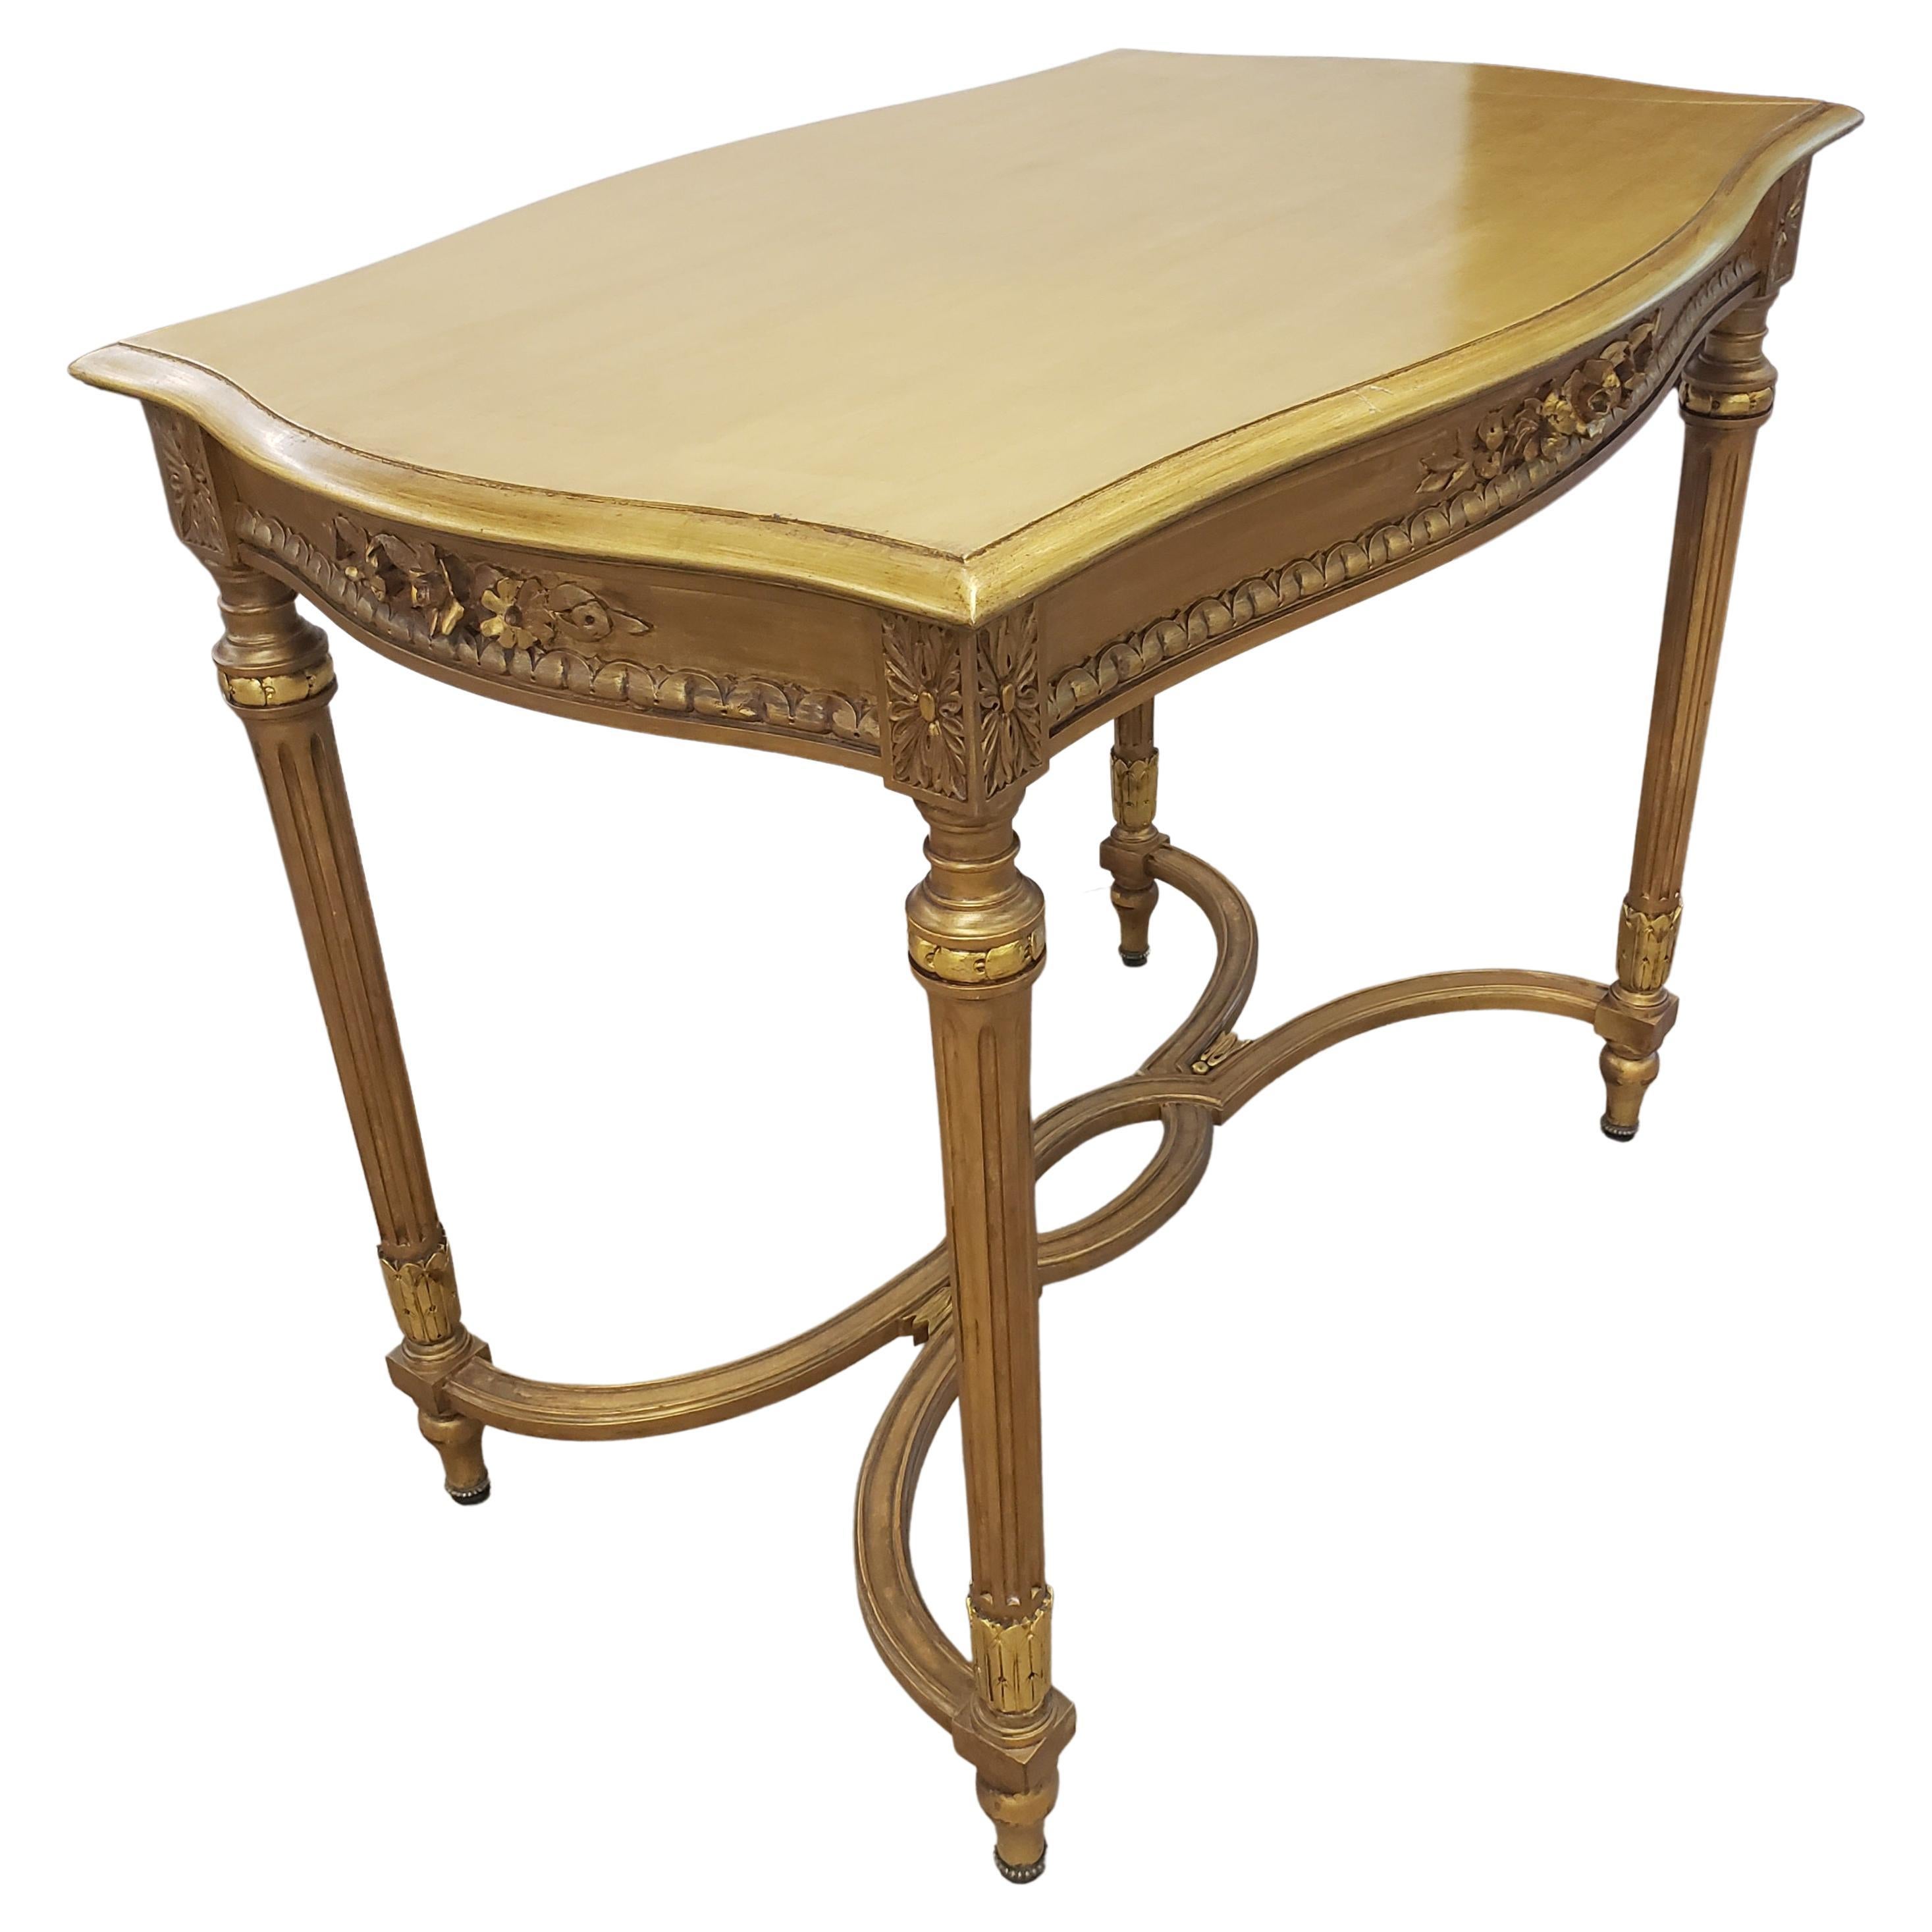 Louis XVI Style Gilt center table with stretcher. All solid wood. Real wood carvings.
Very good vintage condition.